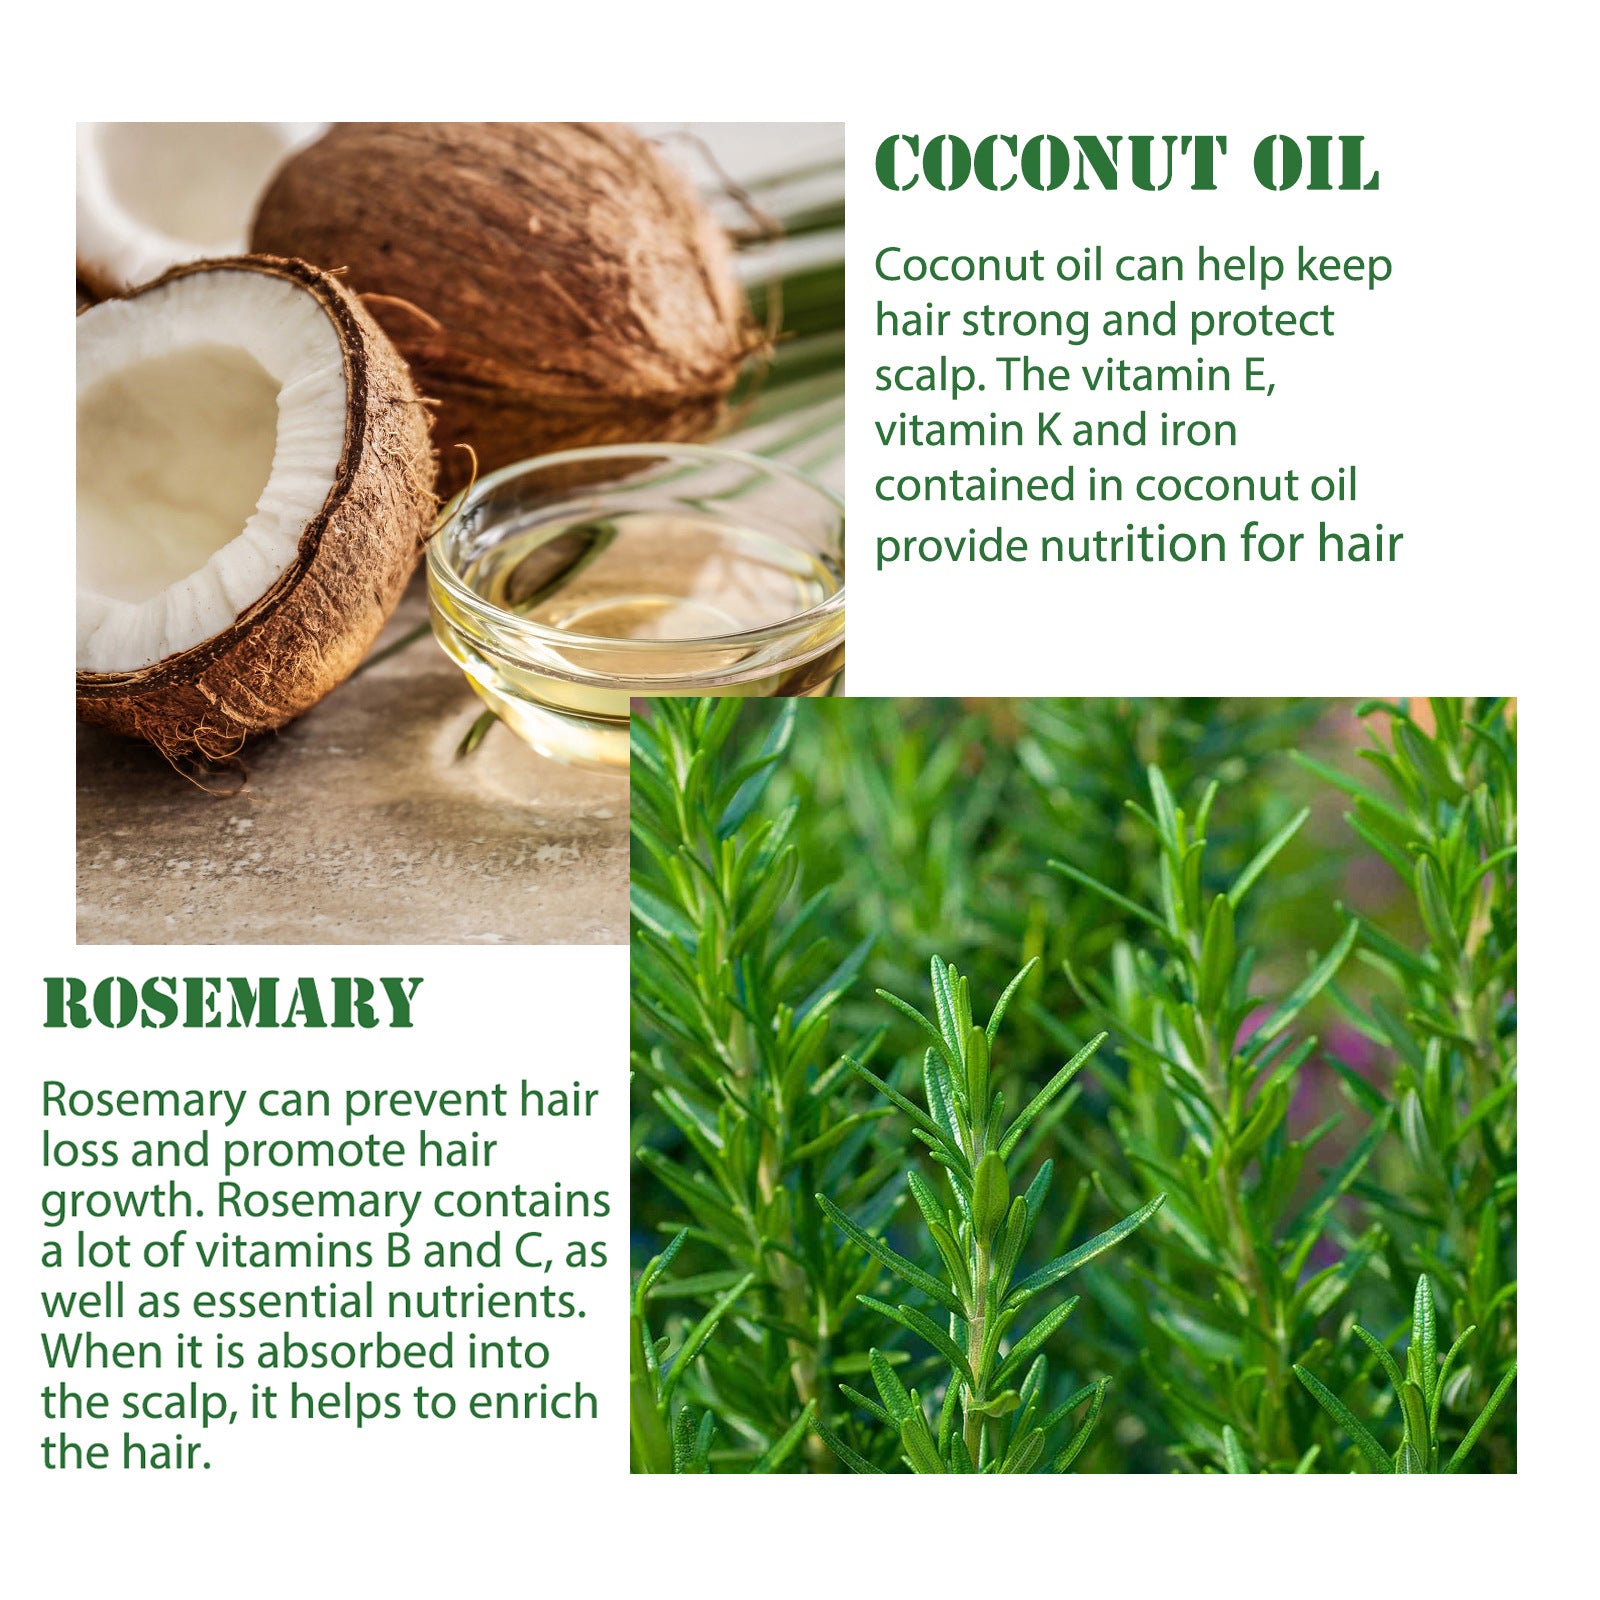 cocunt oil and hair oil